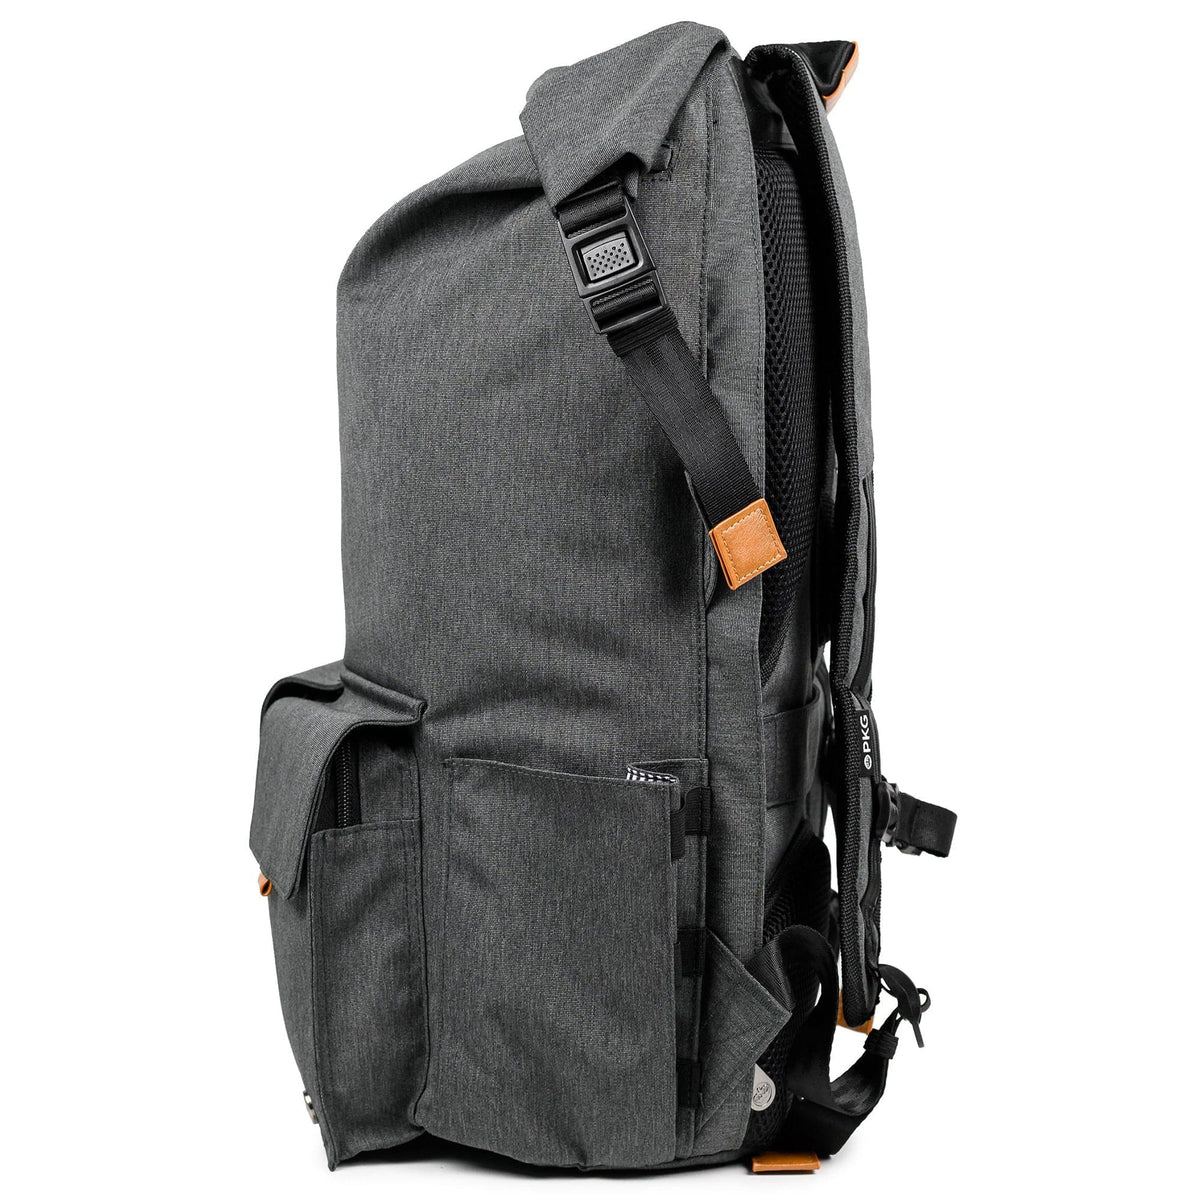 PKG Concord 15" Expandable Roll-Tab Backpack